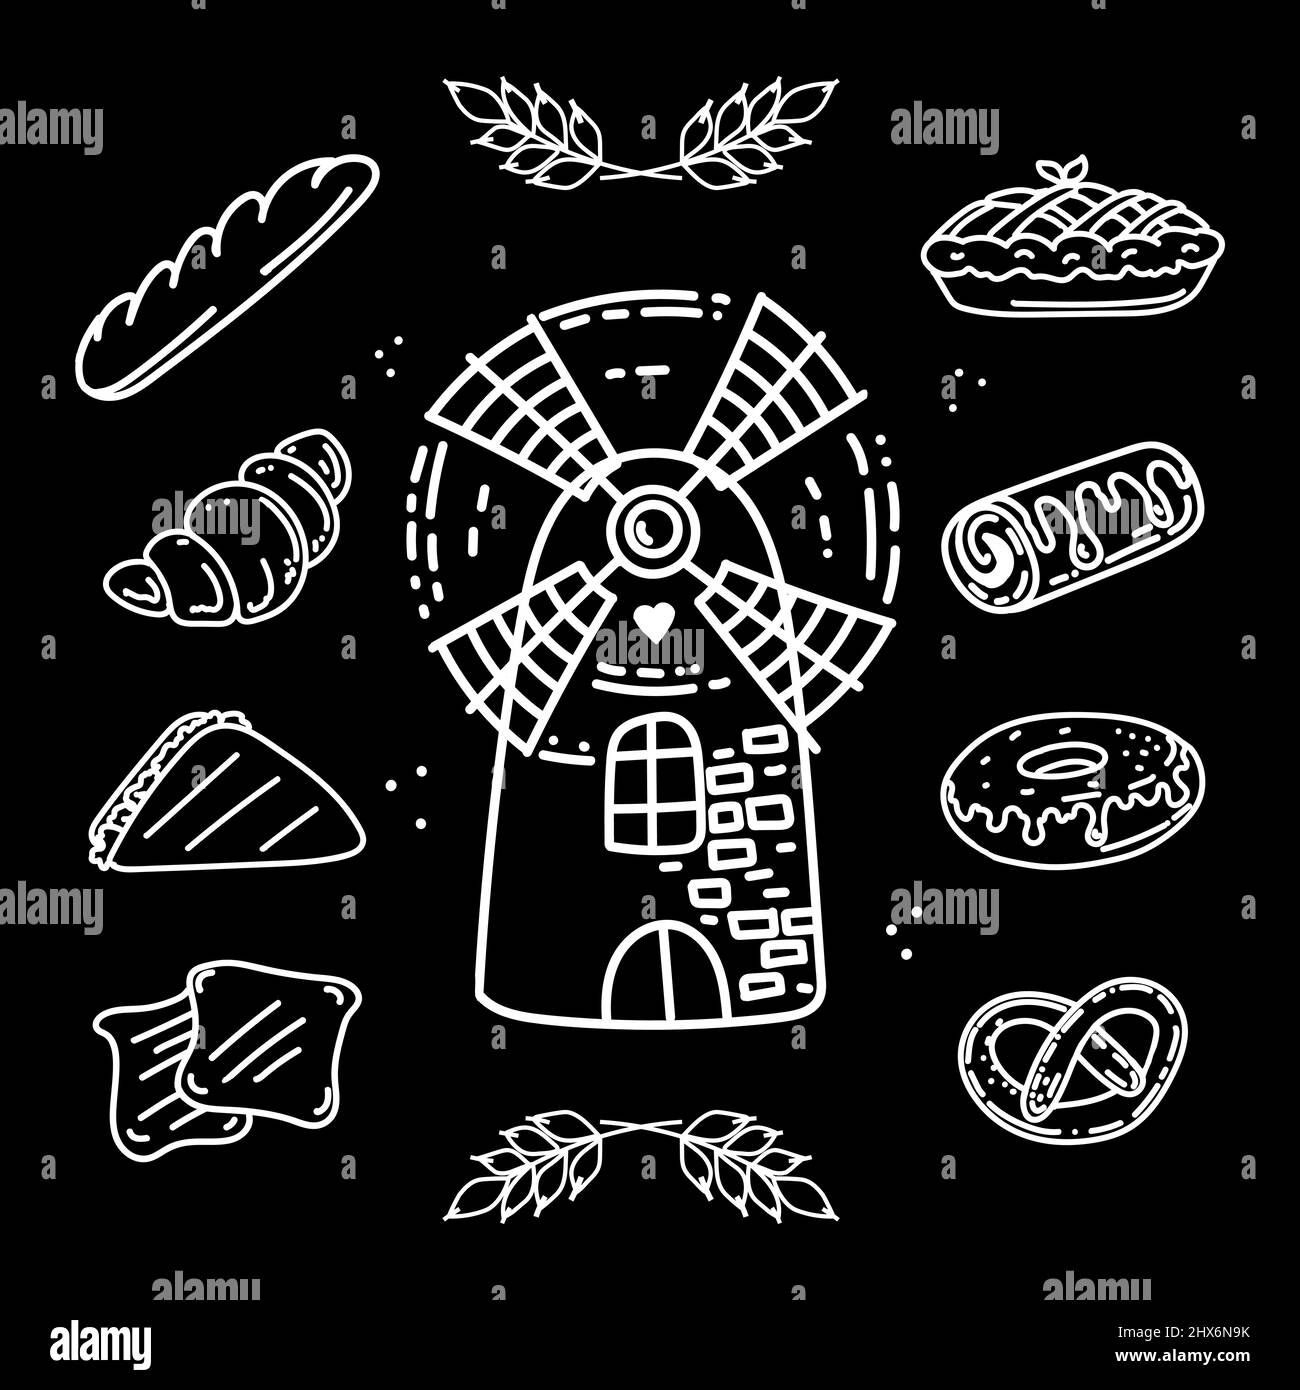 Set of baked goods, hand-drawn elements in doodle style. Mill for grinding grain. Flour products: bread, bagel, croissants and sandwich. Spike of whea Stock Vector